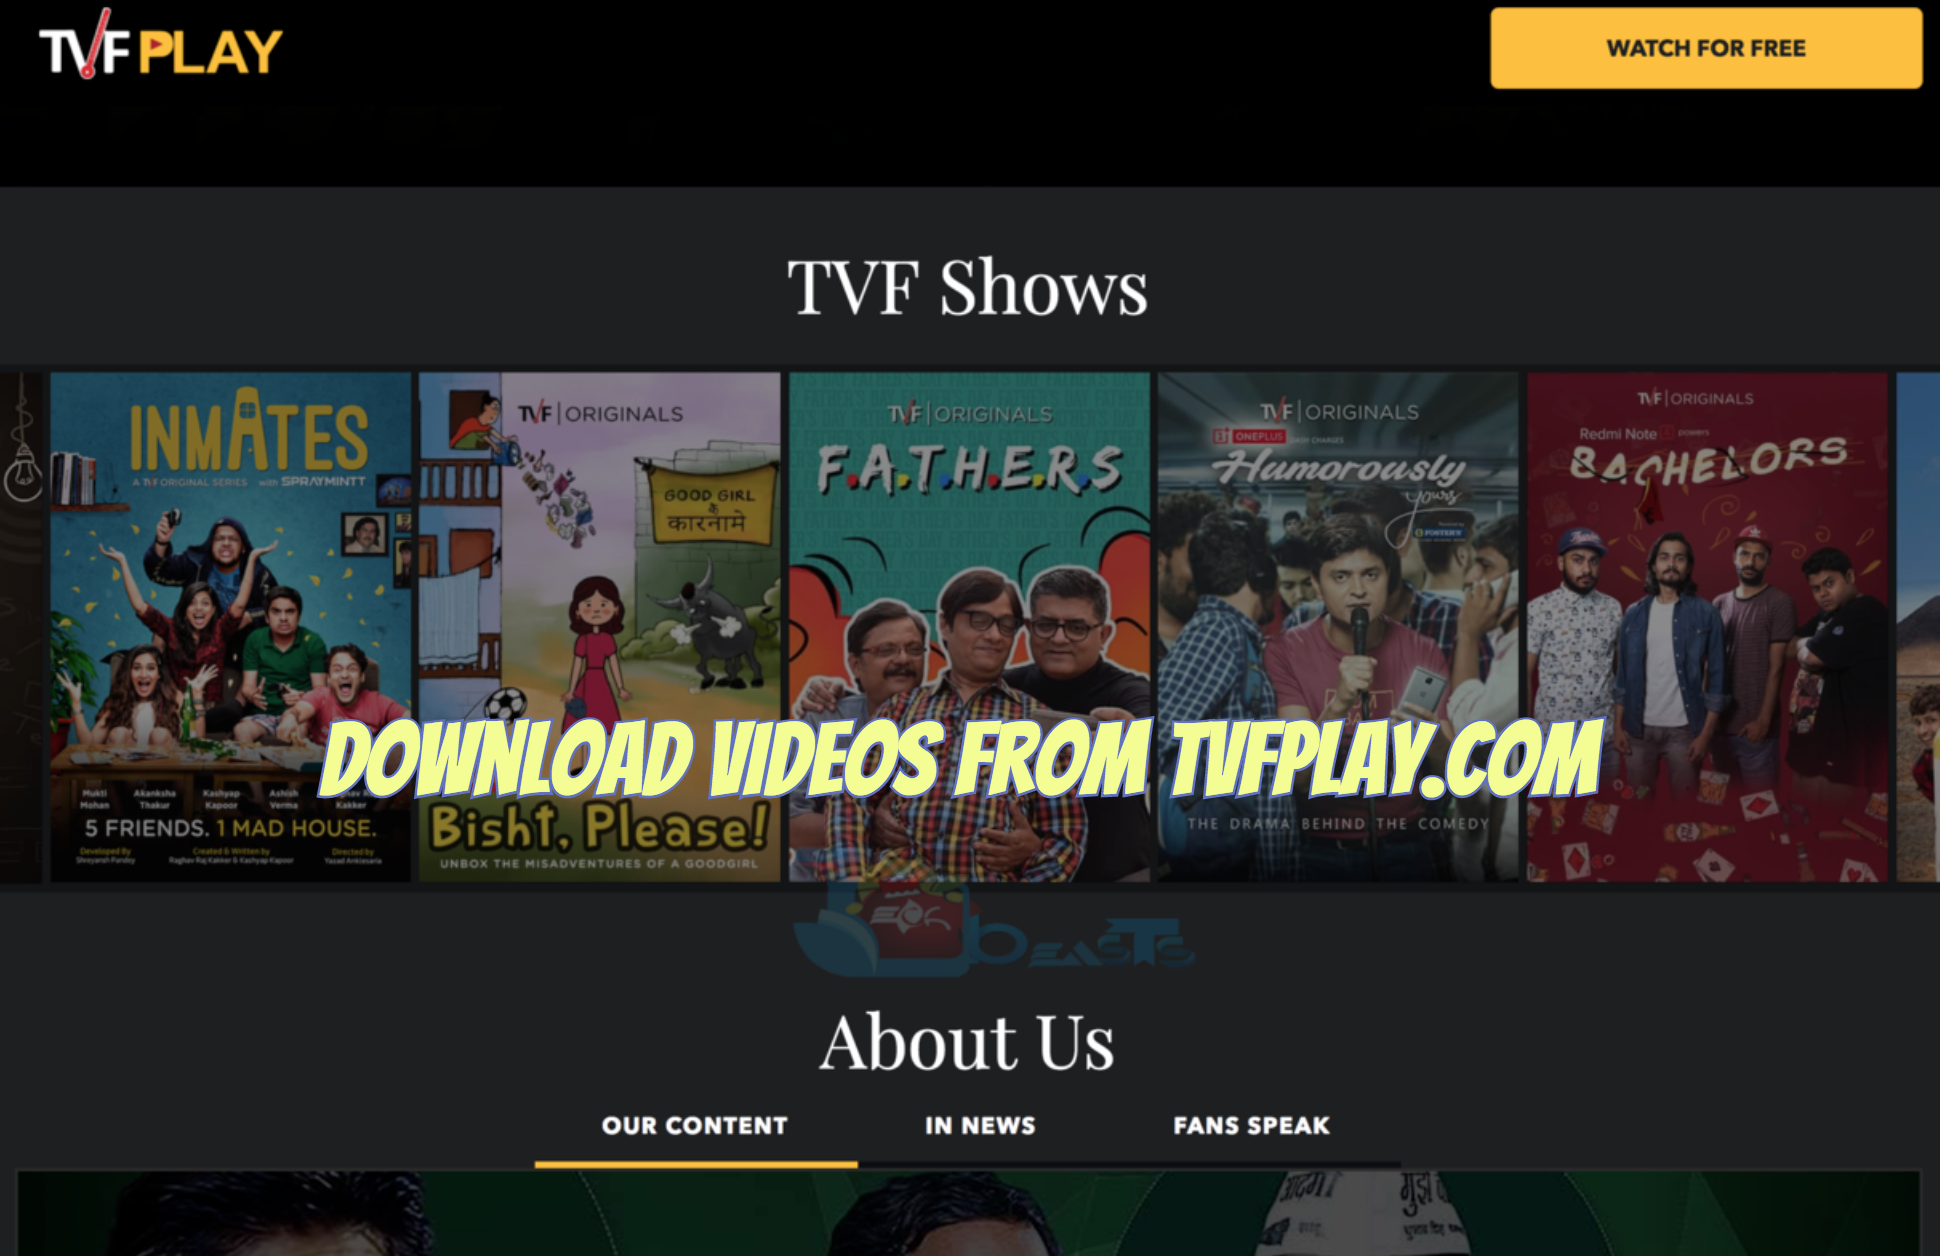 Download Videos from TVFPlay.com